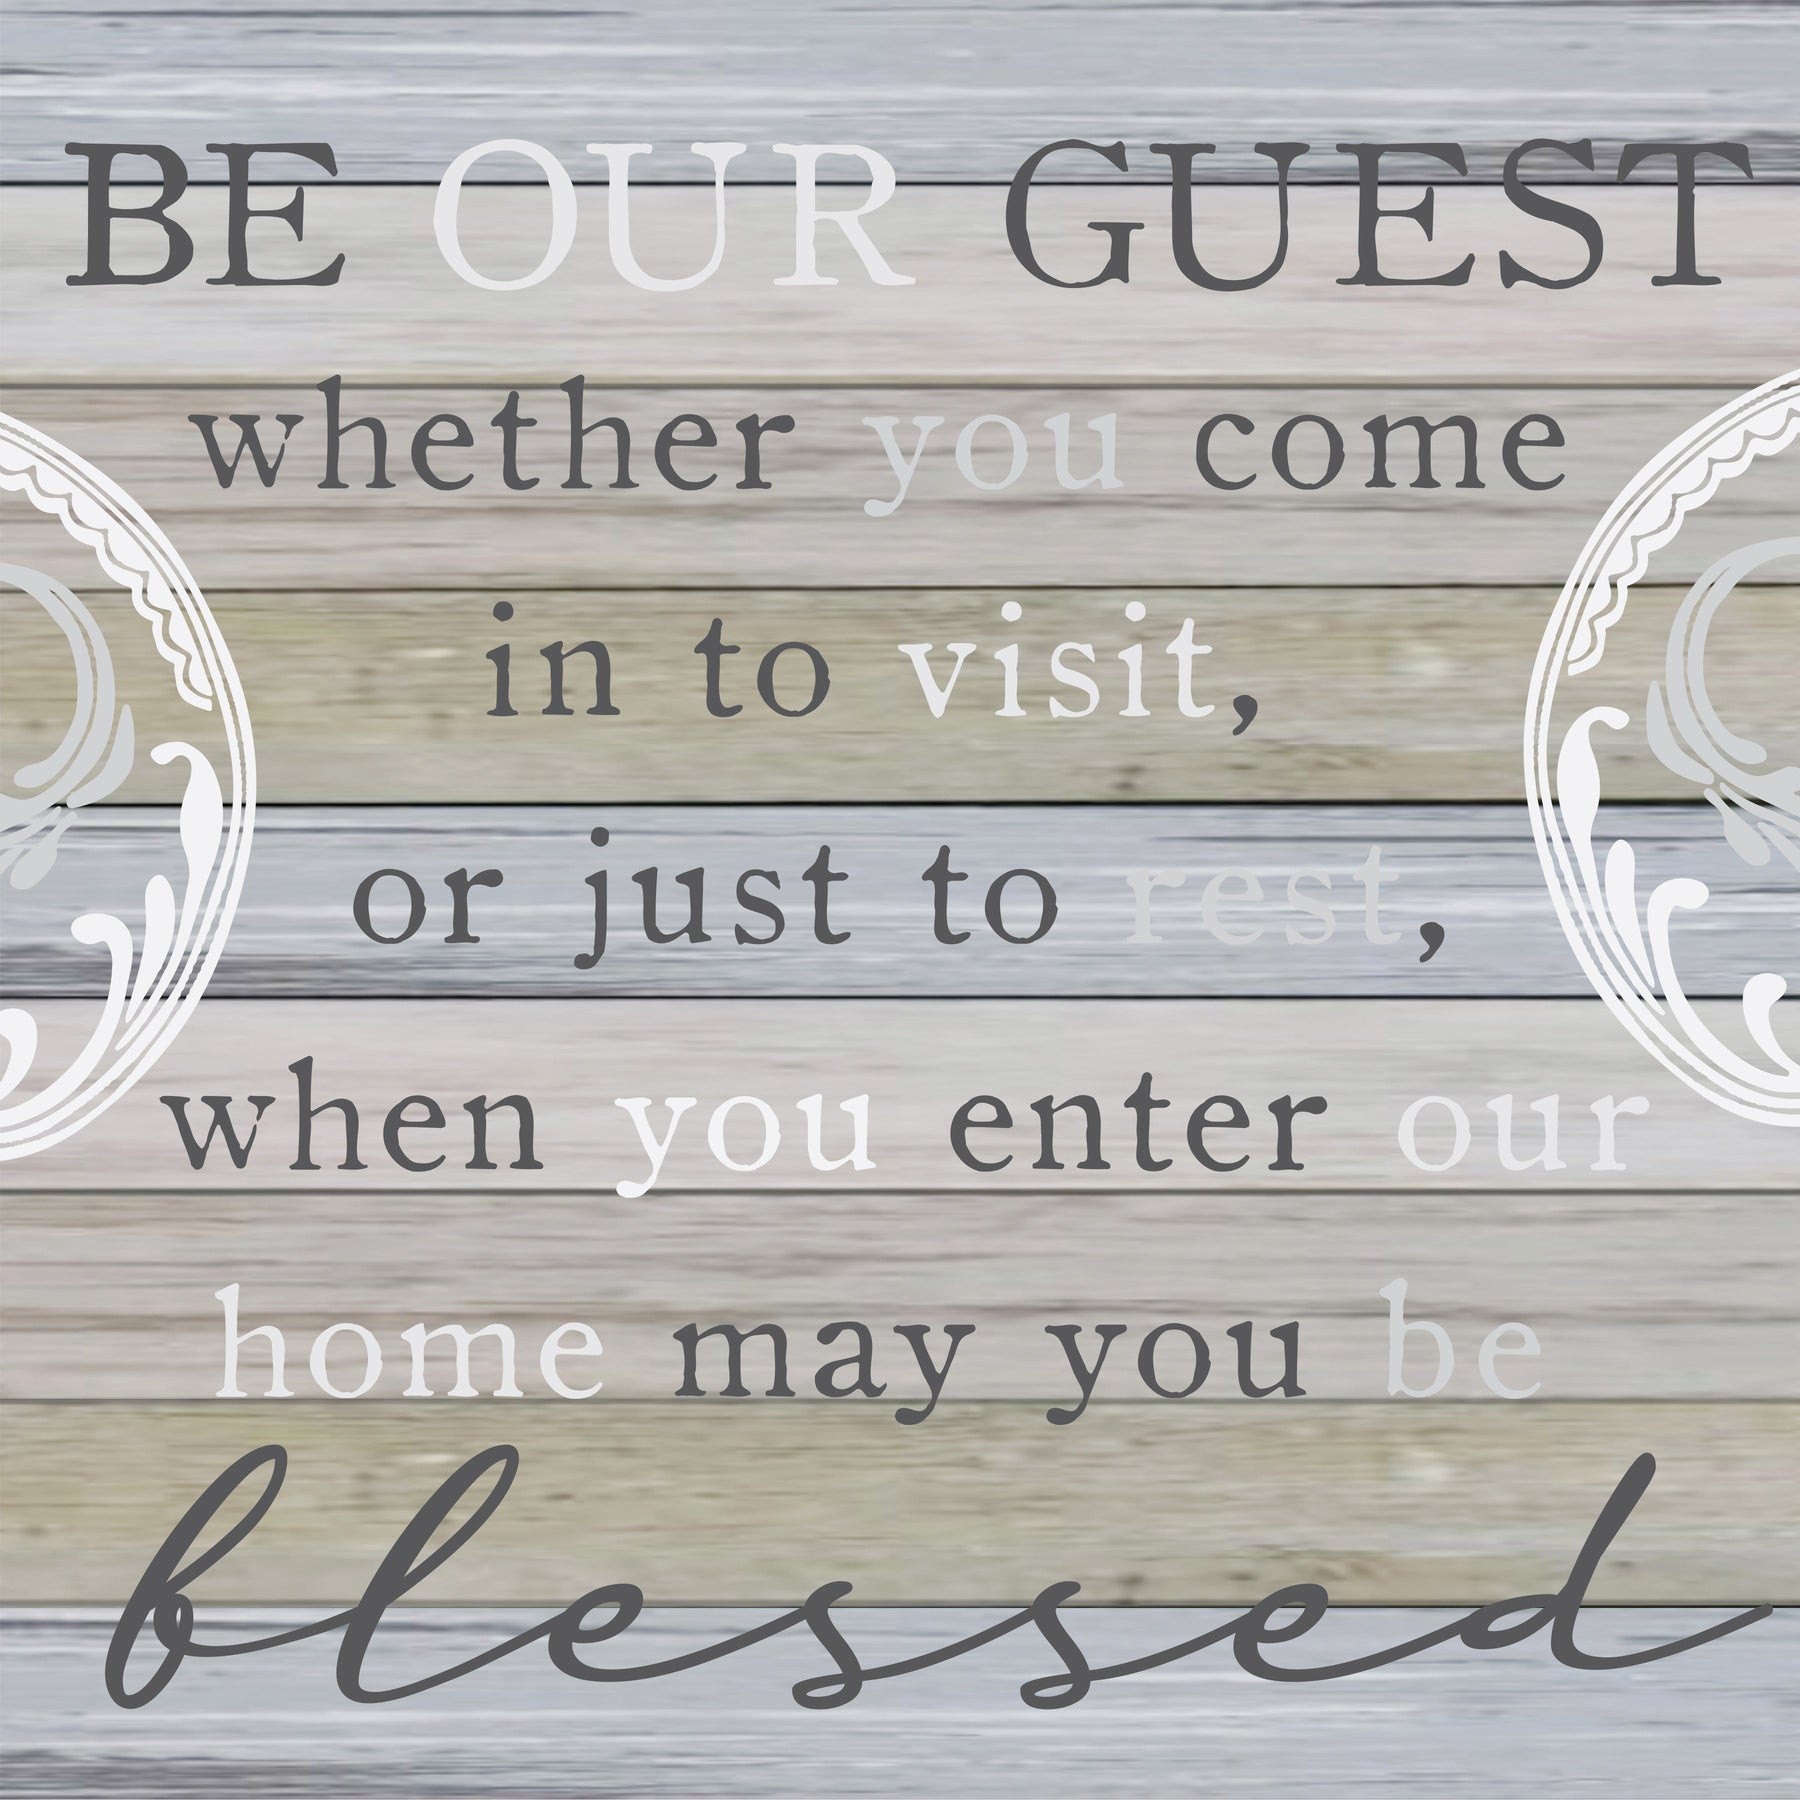 Be Our Guest: whether you come in to visit, or just to rest, when you enter our home, may you be blessed / 12x12 Indoor/Outdoor Recycled Plastic Wall Art